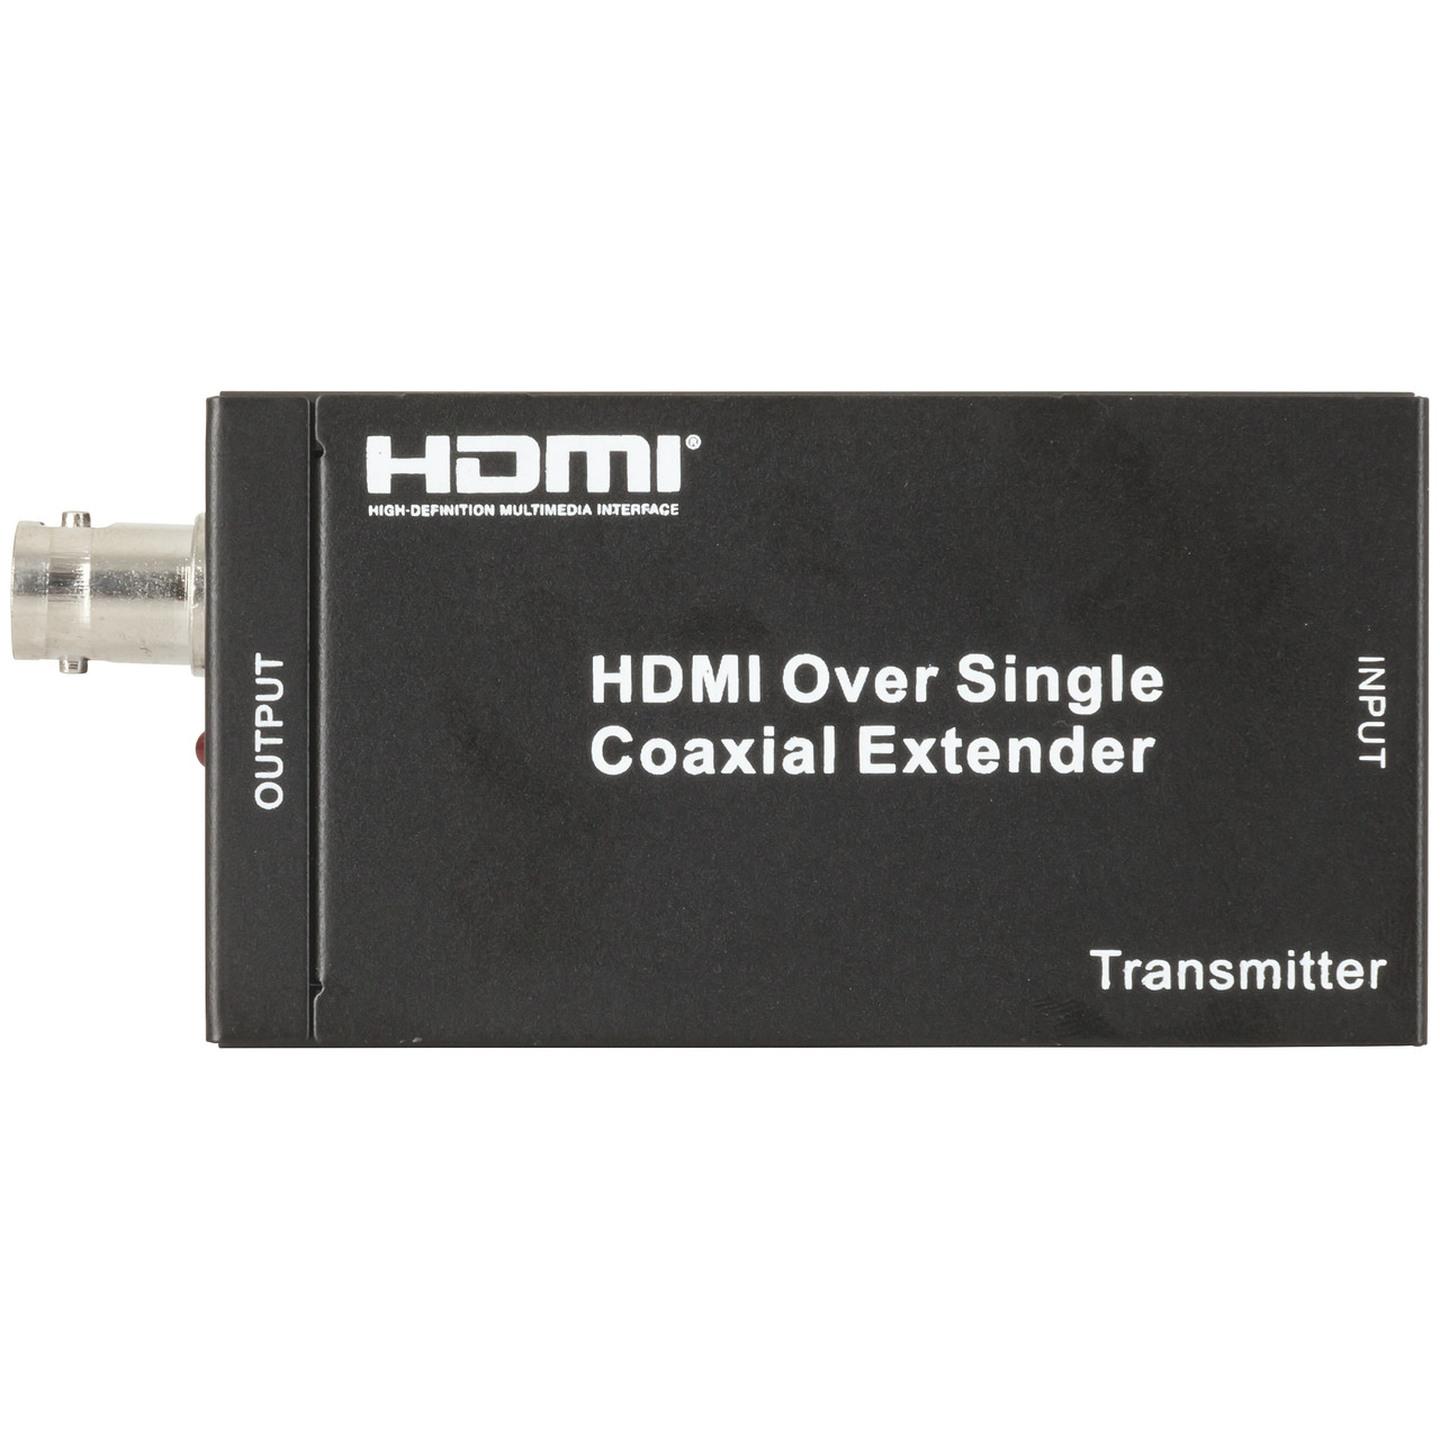 Coaxial HDMI Extender with IR Extender